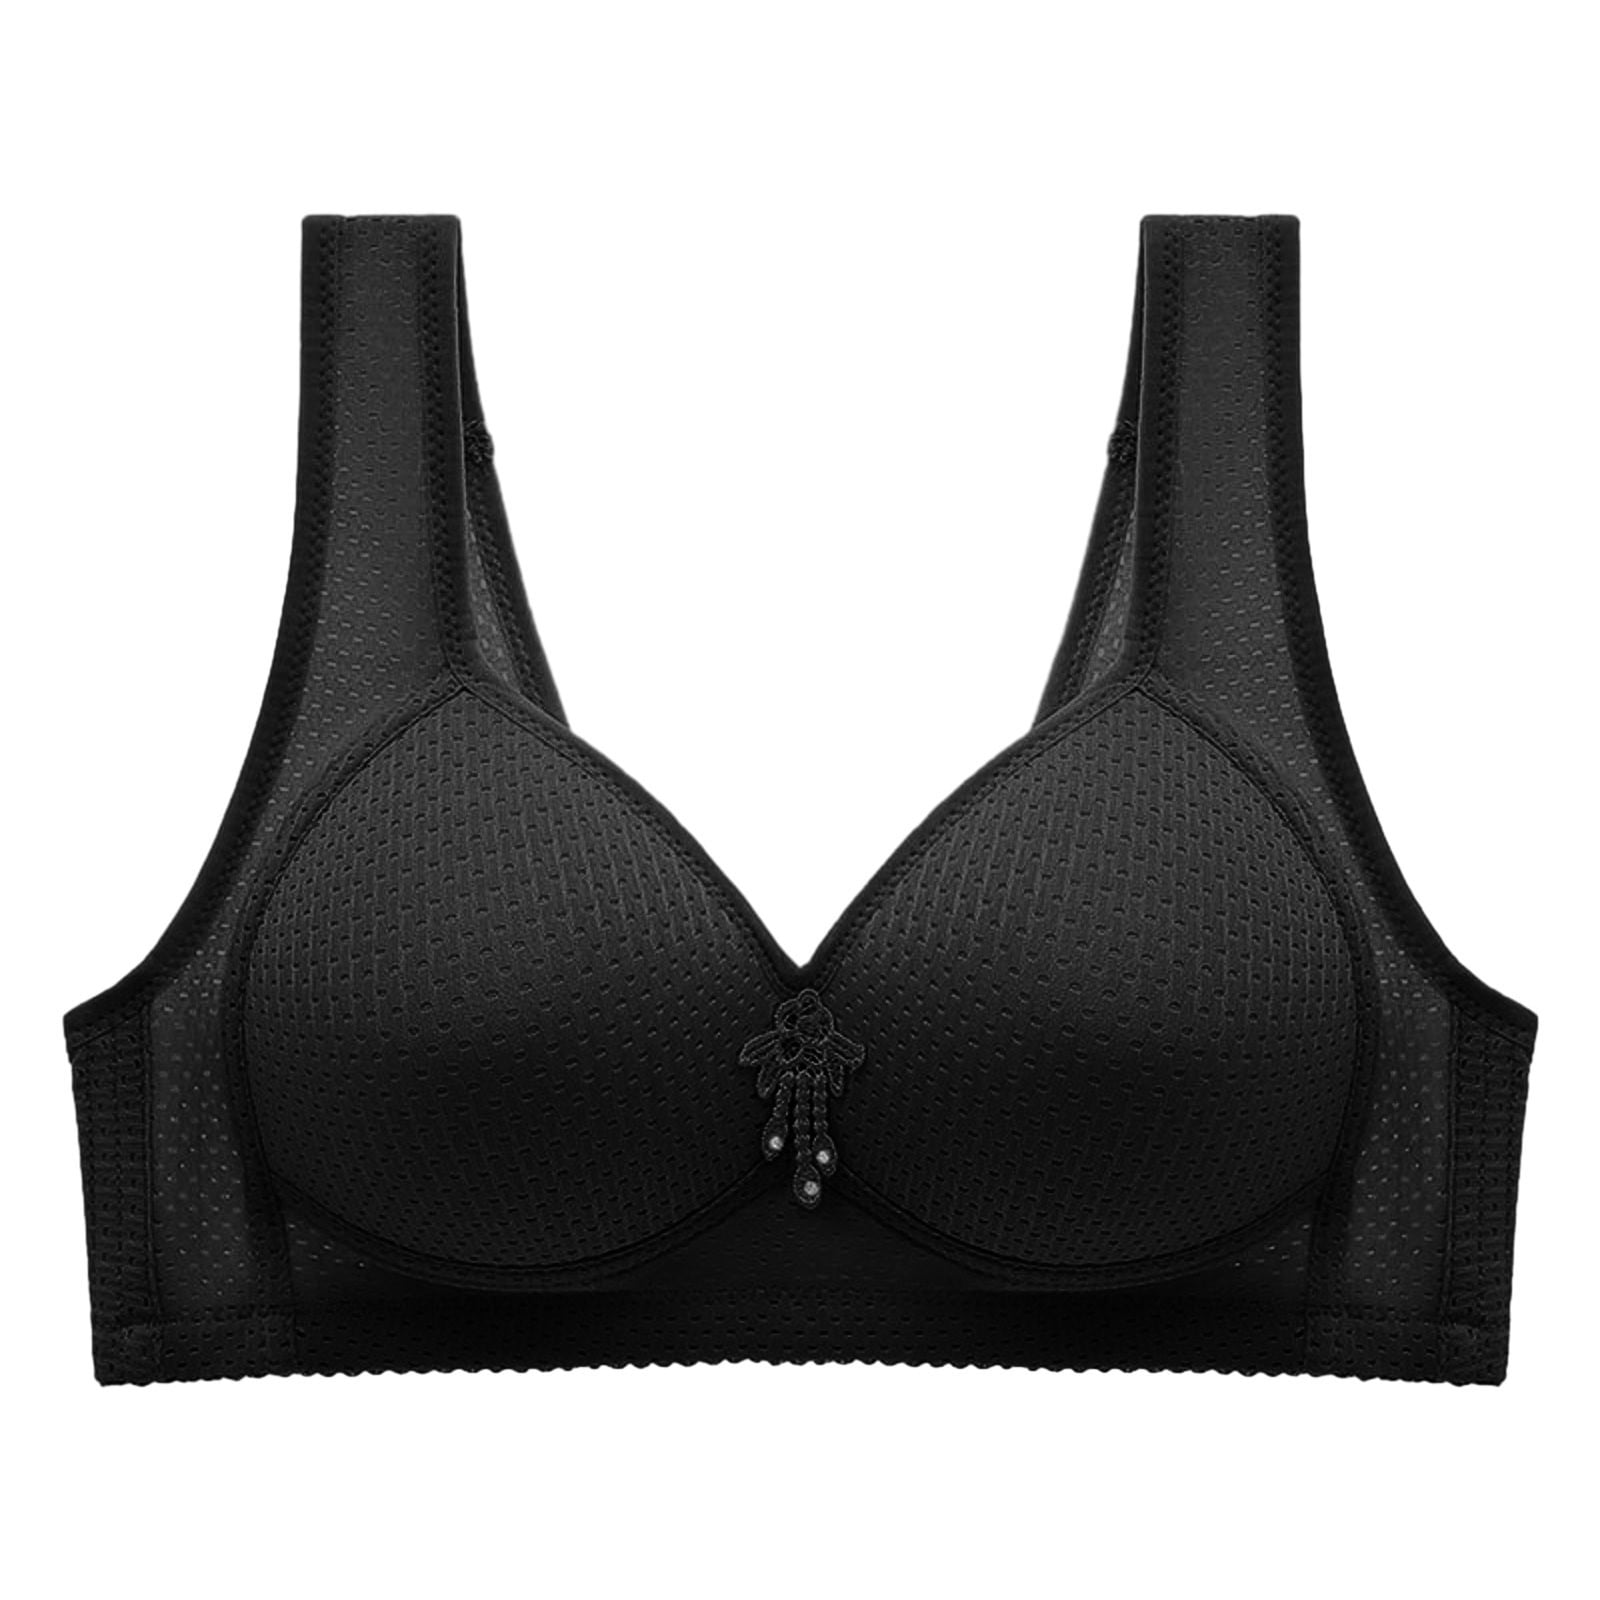  Women's New Large and Thin Fit Adjustable Bra with